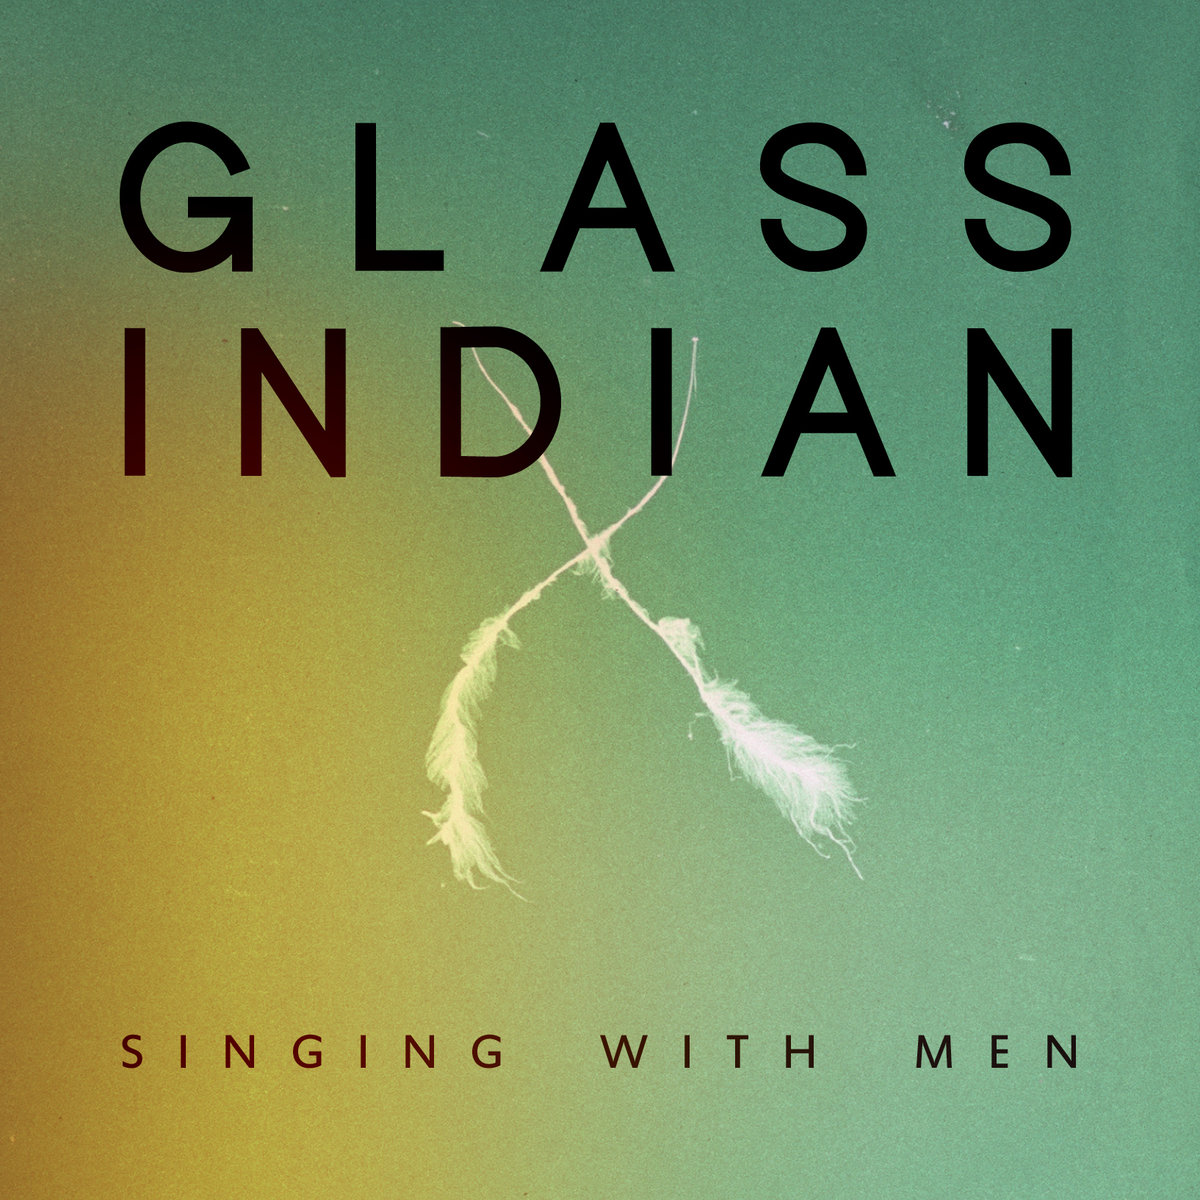 Glass Indian - "Singing With Men" [Recorded, Mixed & Mastered (JP)]